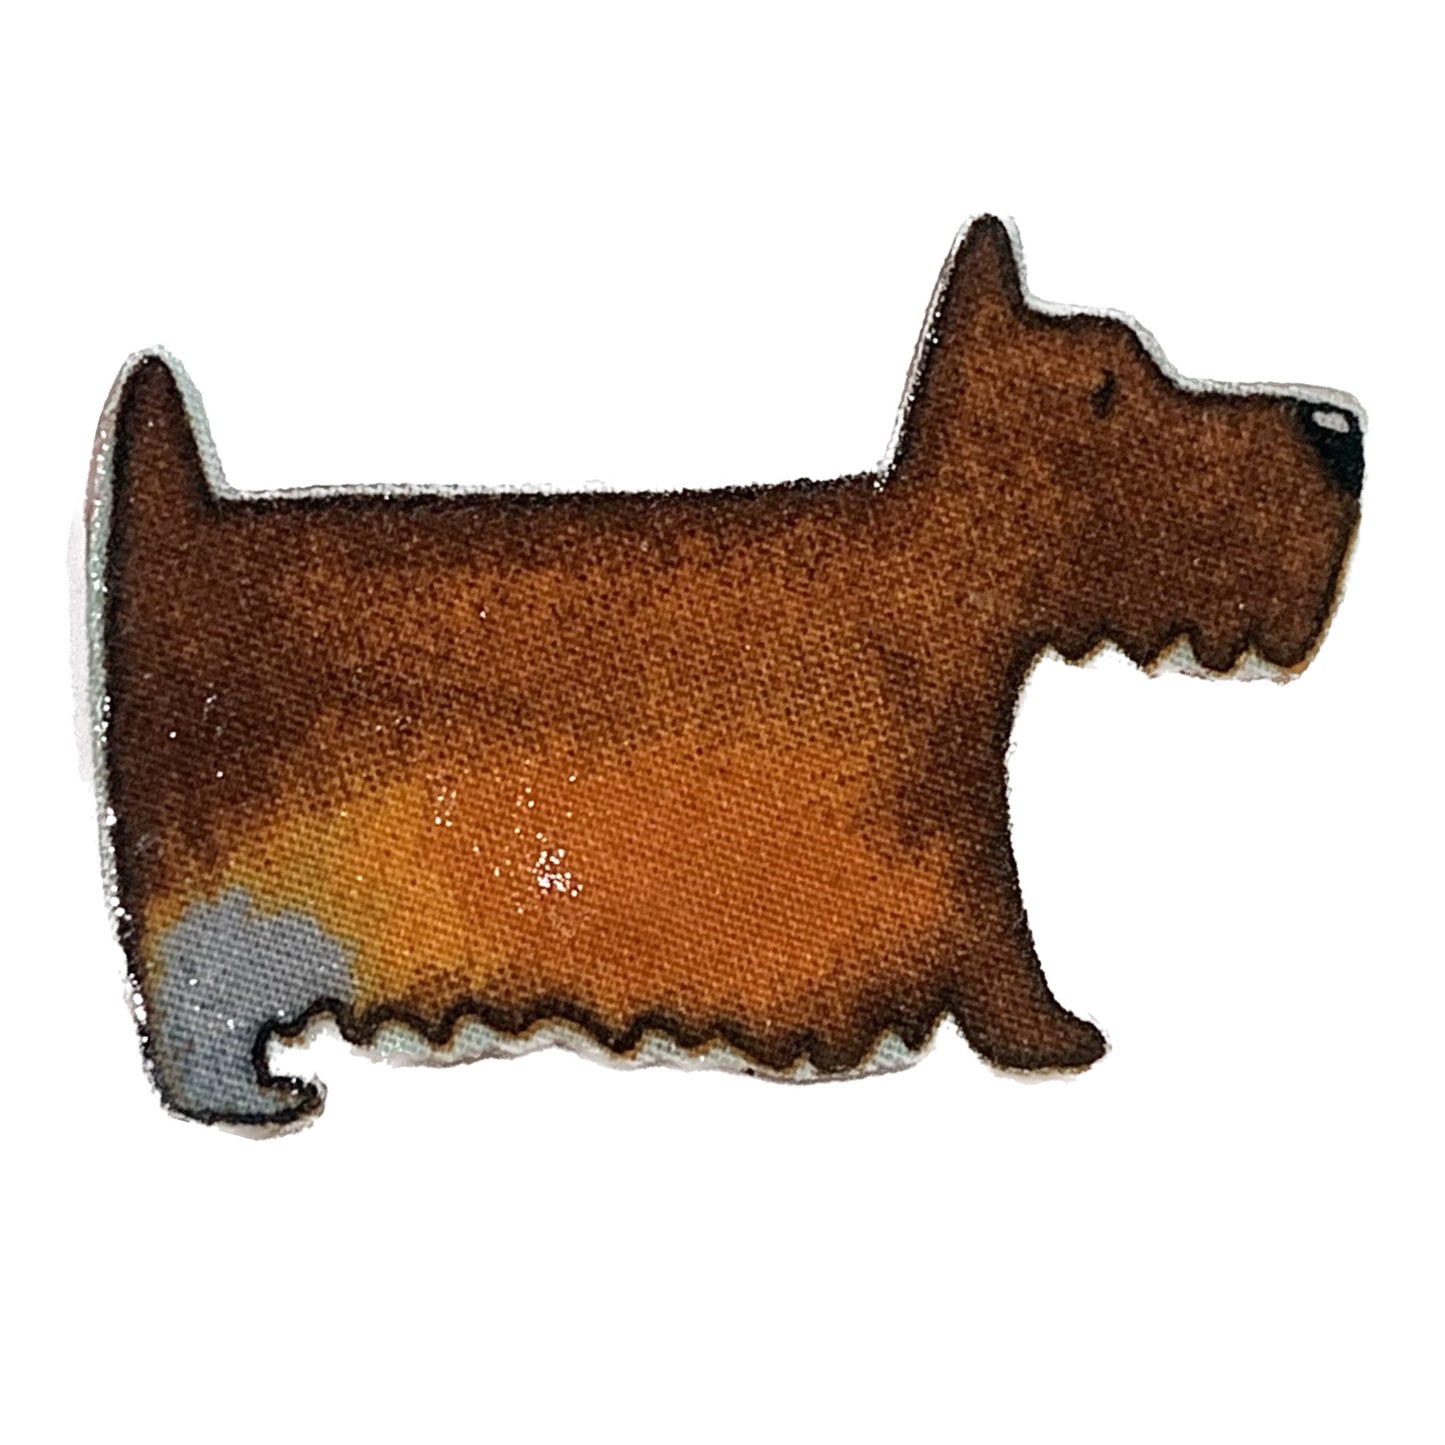 THIS BIRD HAS FLOWN- Fabric Remnant Brooches- Scottie Terrier